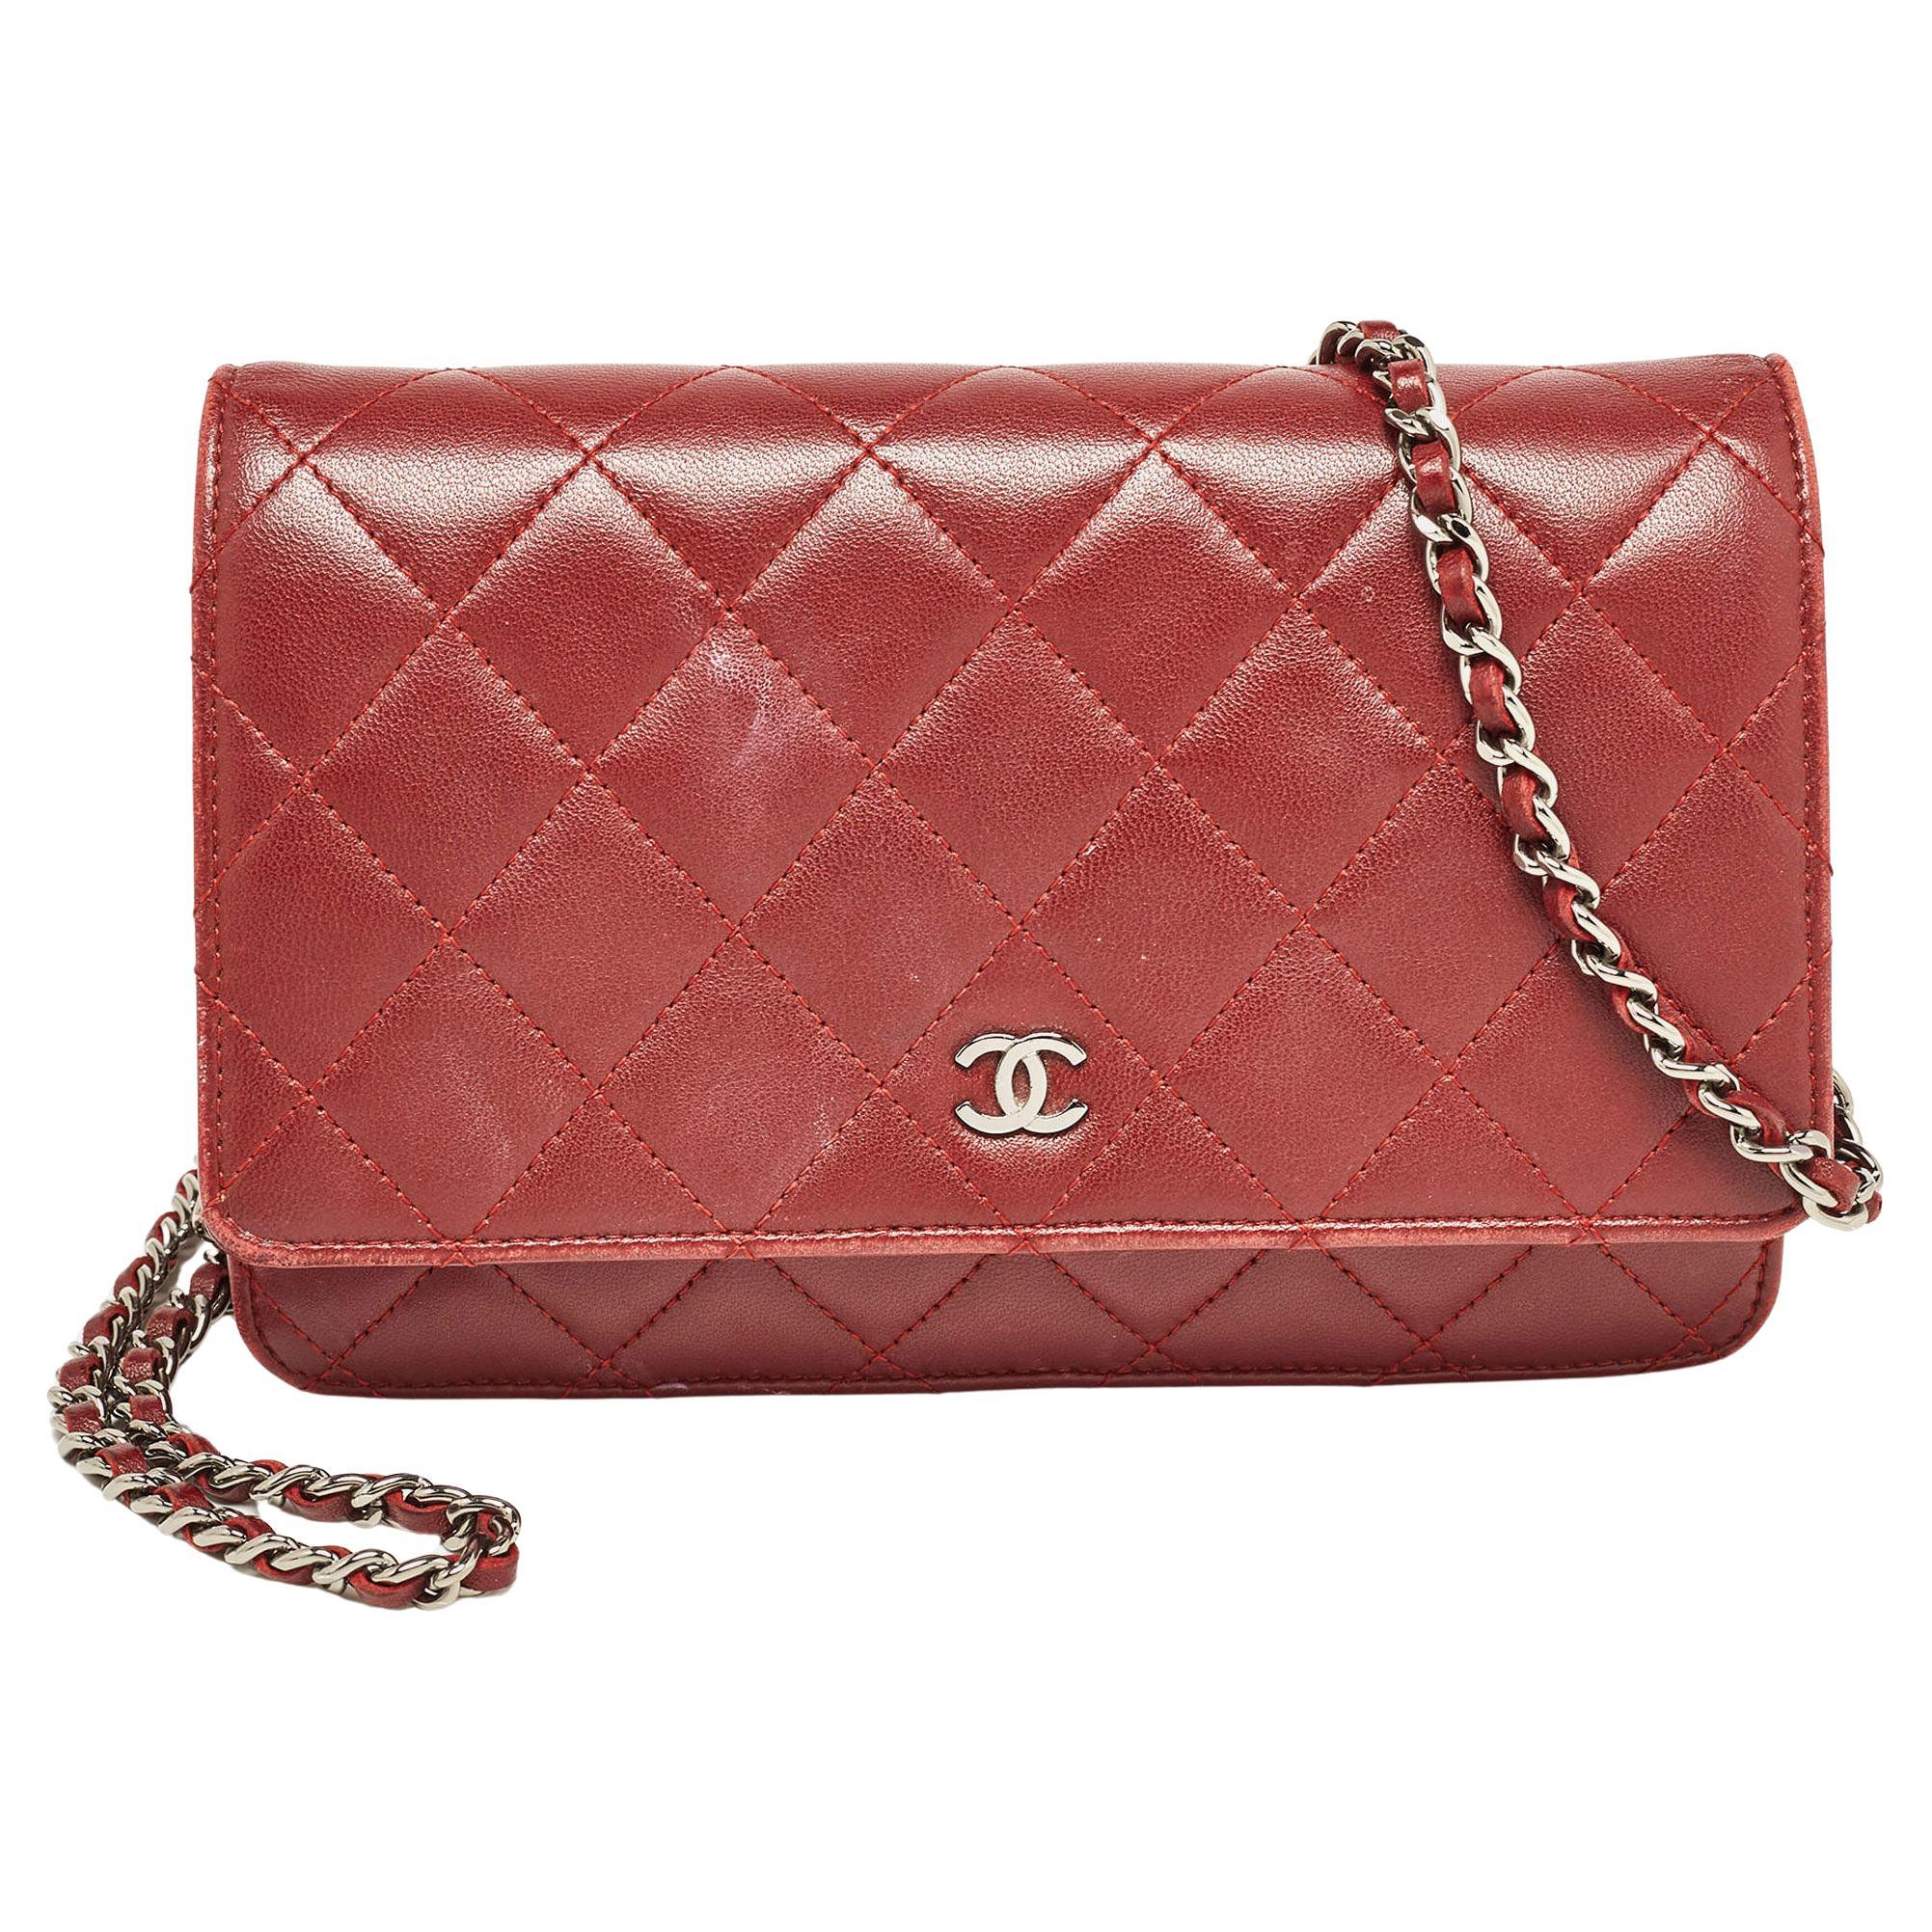 Chanel Burgundy Quilted Leather Classic Wallet on Chain For Sale